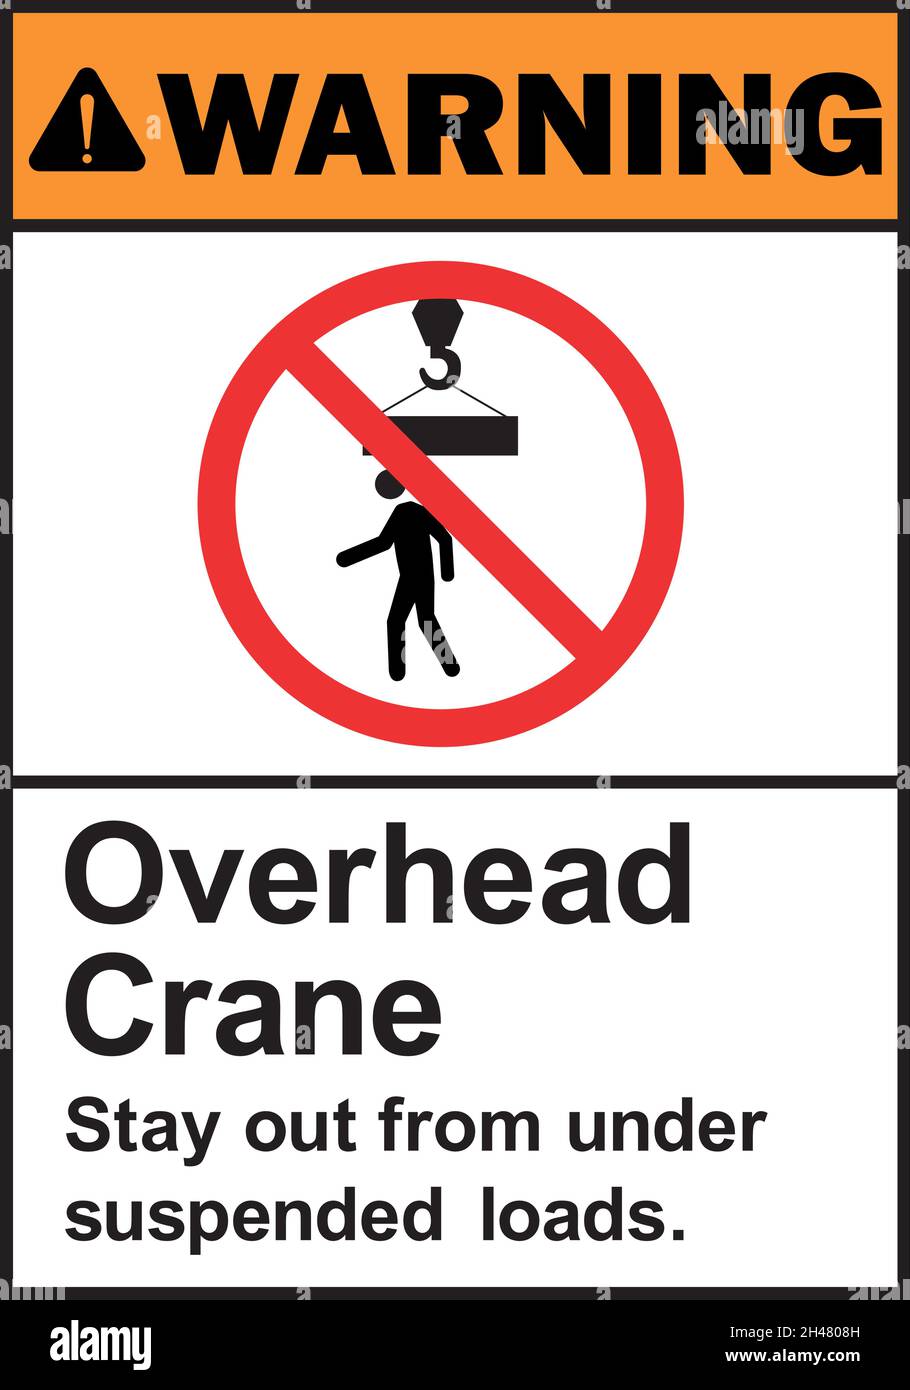 Overhead crane stay out from under suspended loads warning sign. Construction signs and symbols. Stock Vector